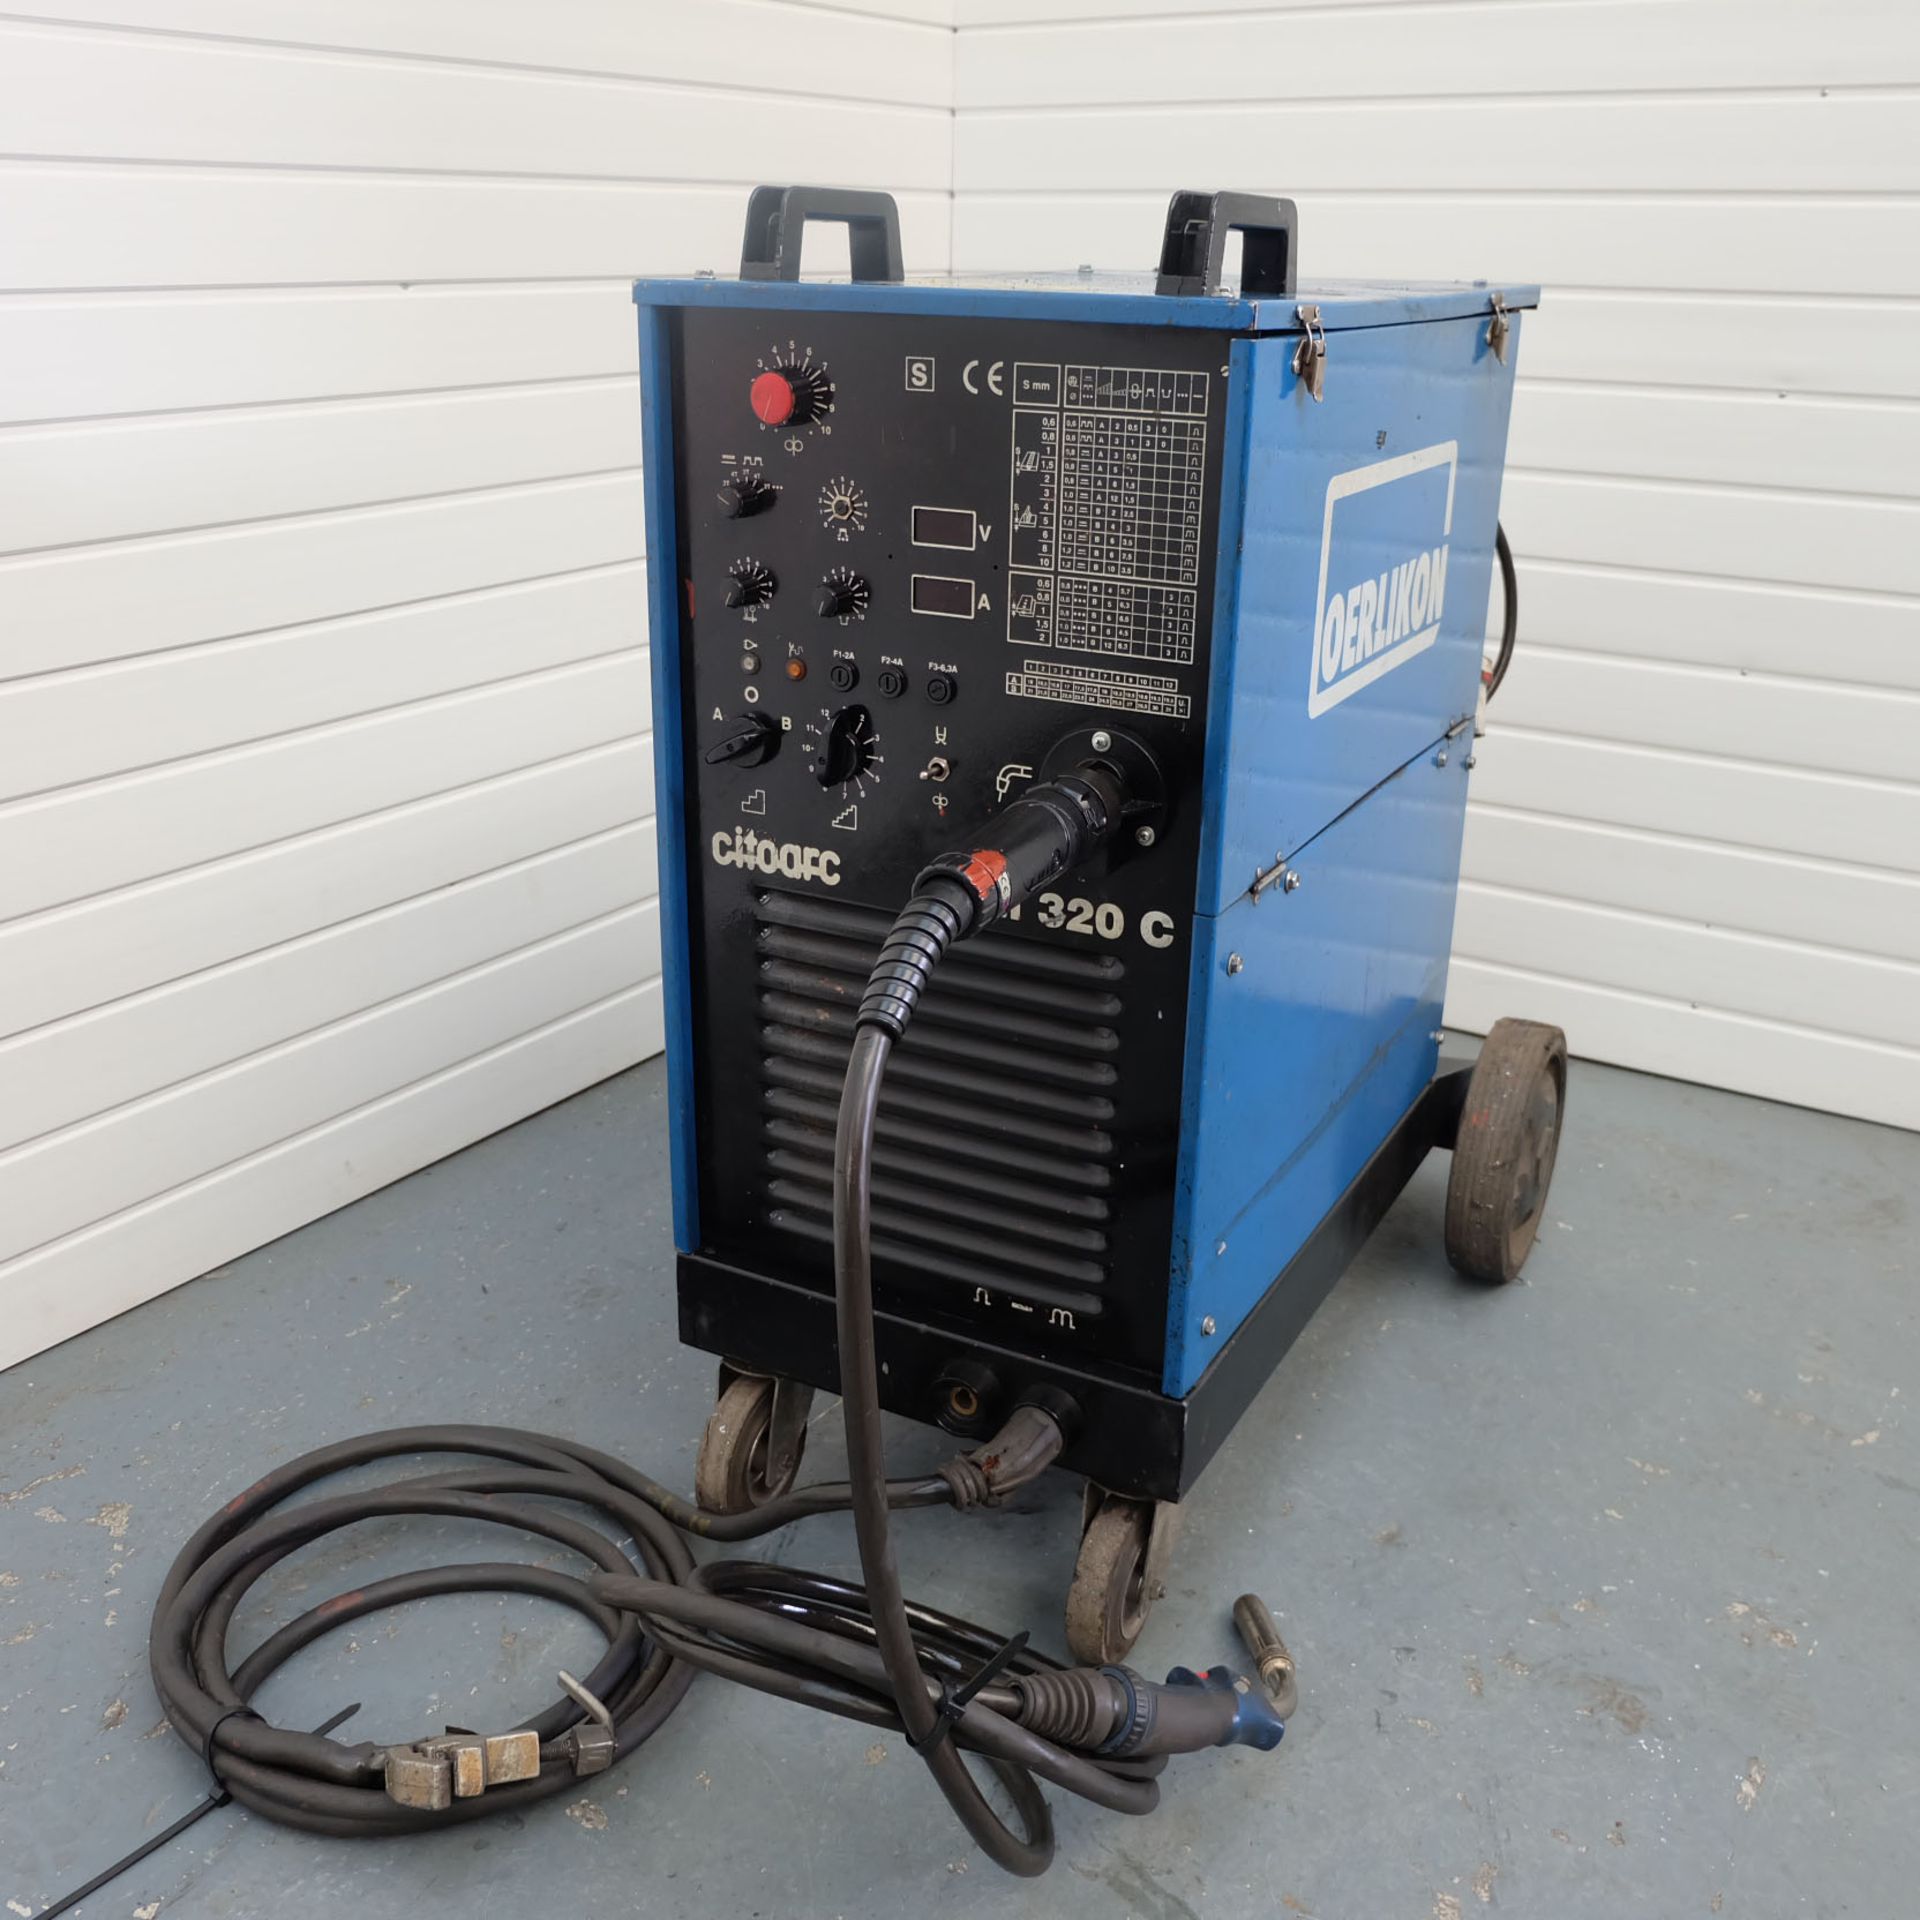 Oerlikon Citoarc M320C Mig Welder With Integral Wire Feed.